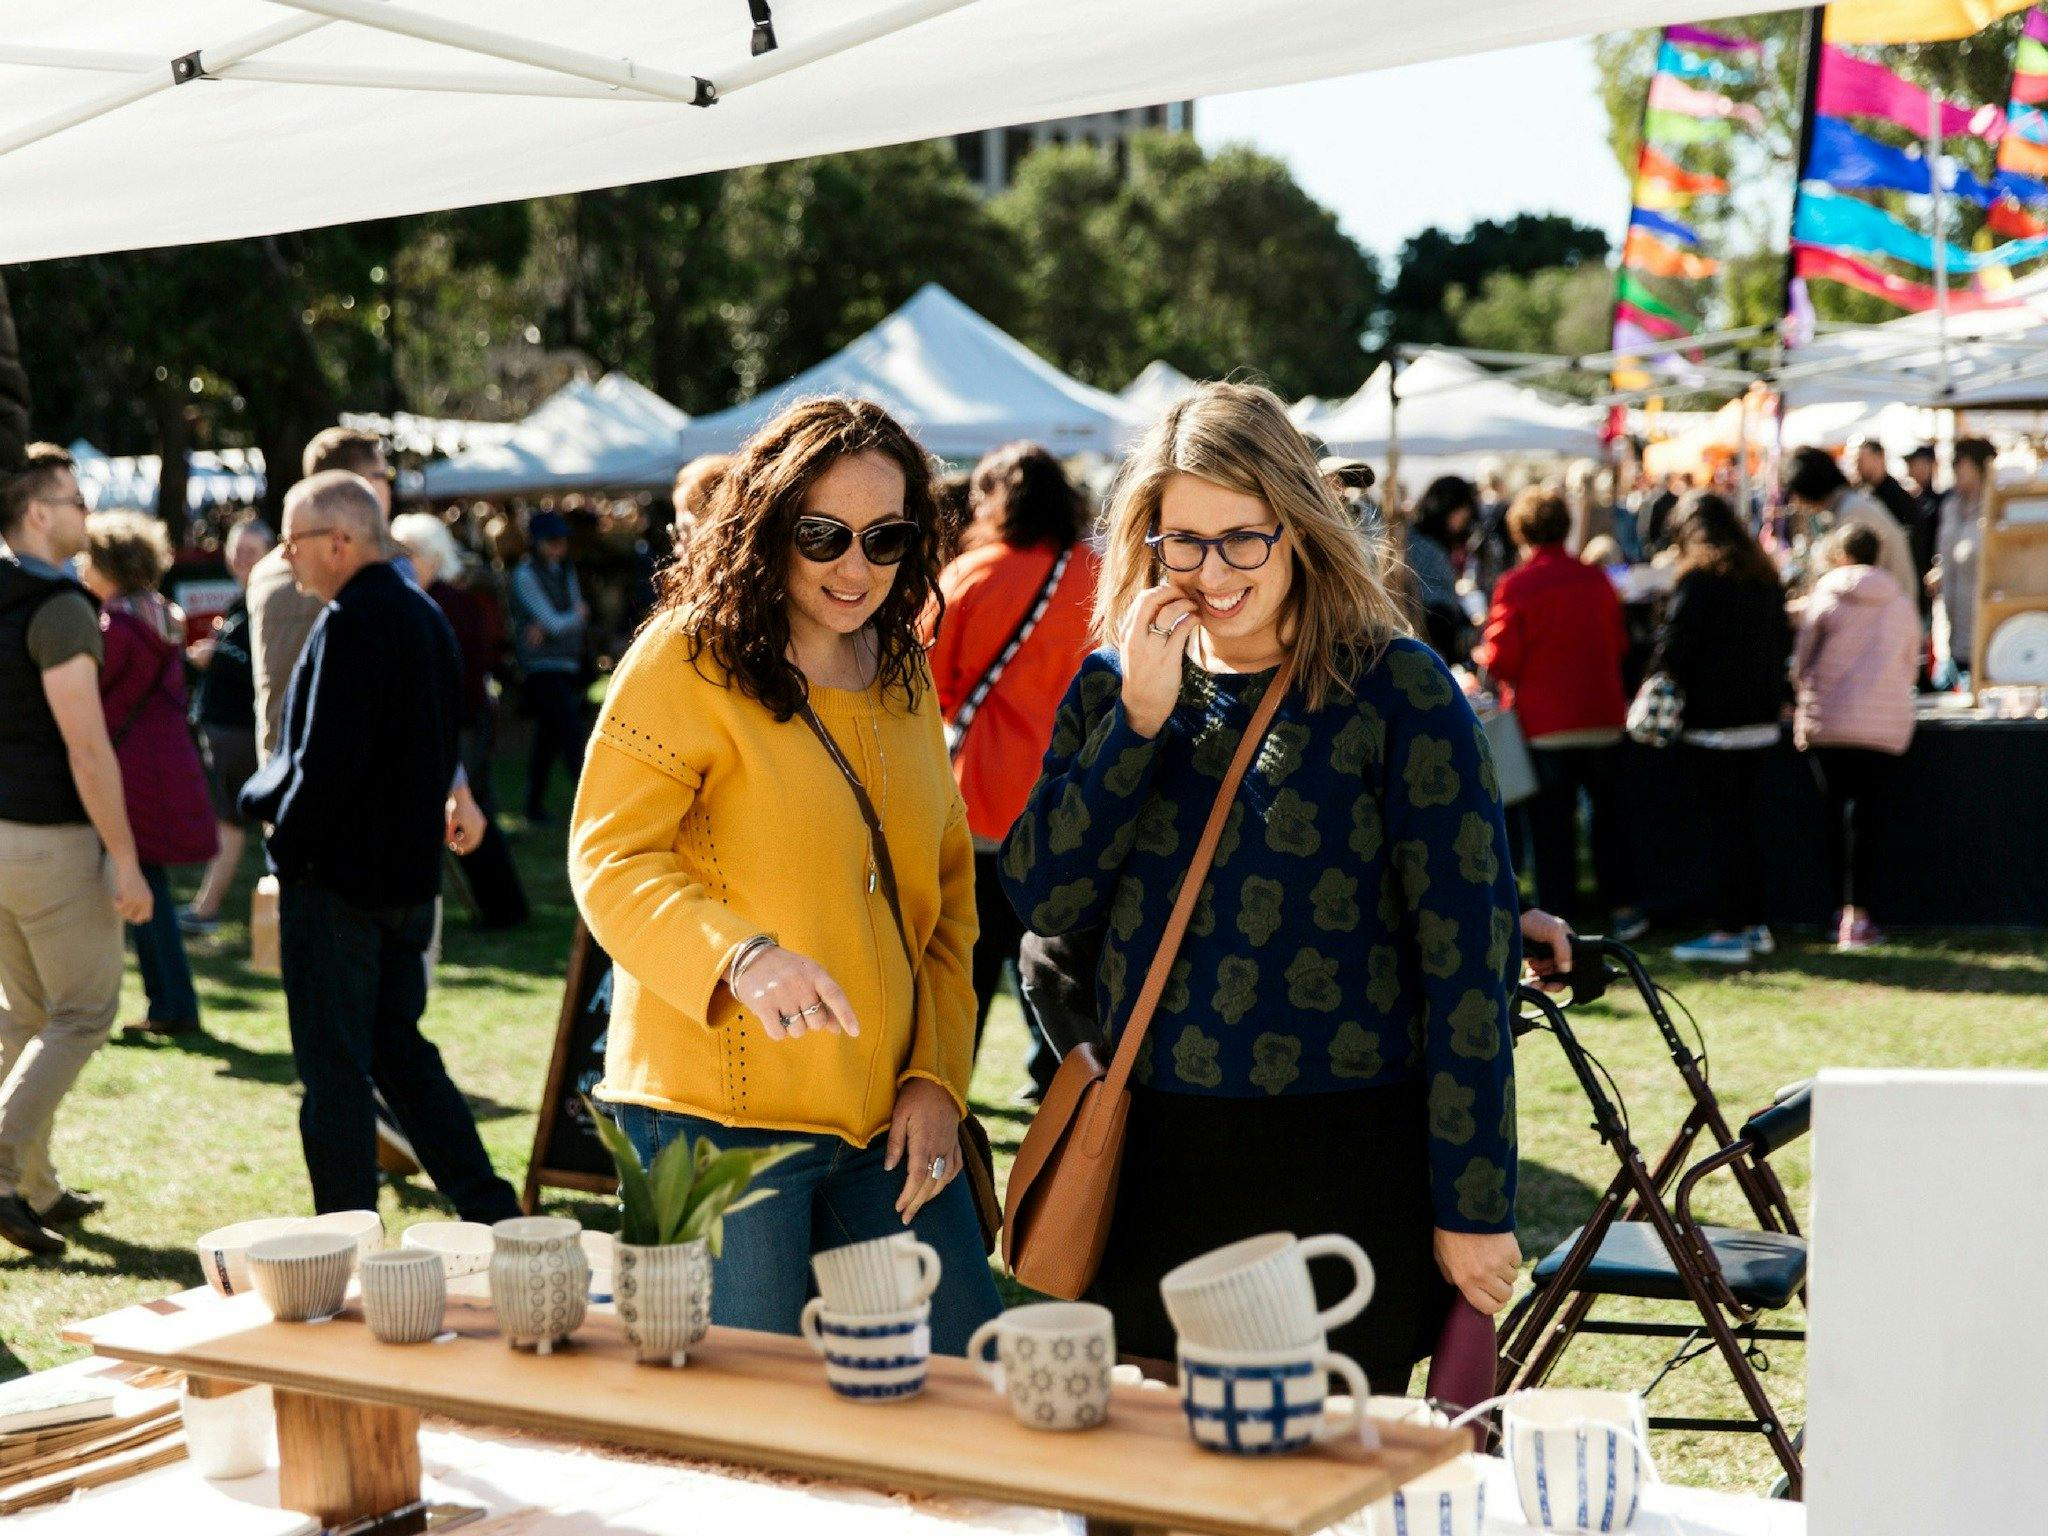 Discover handmade goods straight from the hands of Olive Tree Market makers, designers & artisans